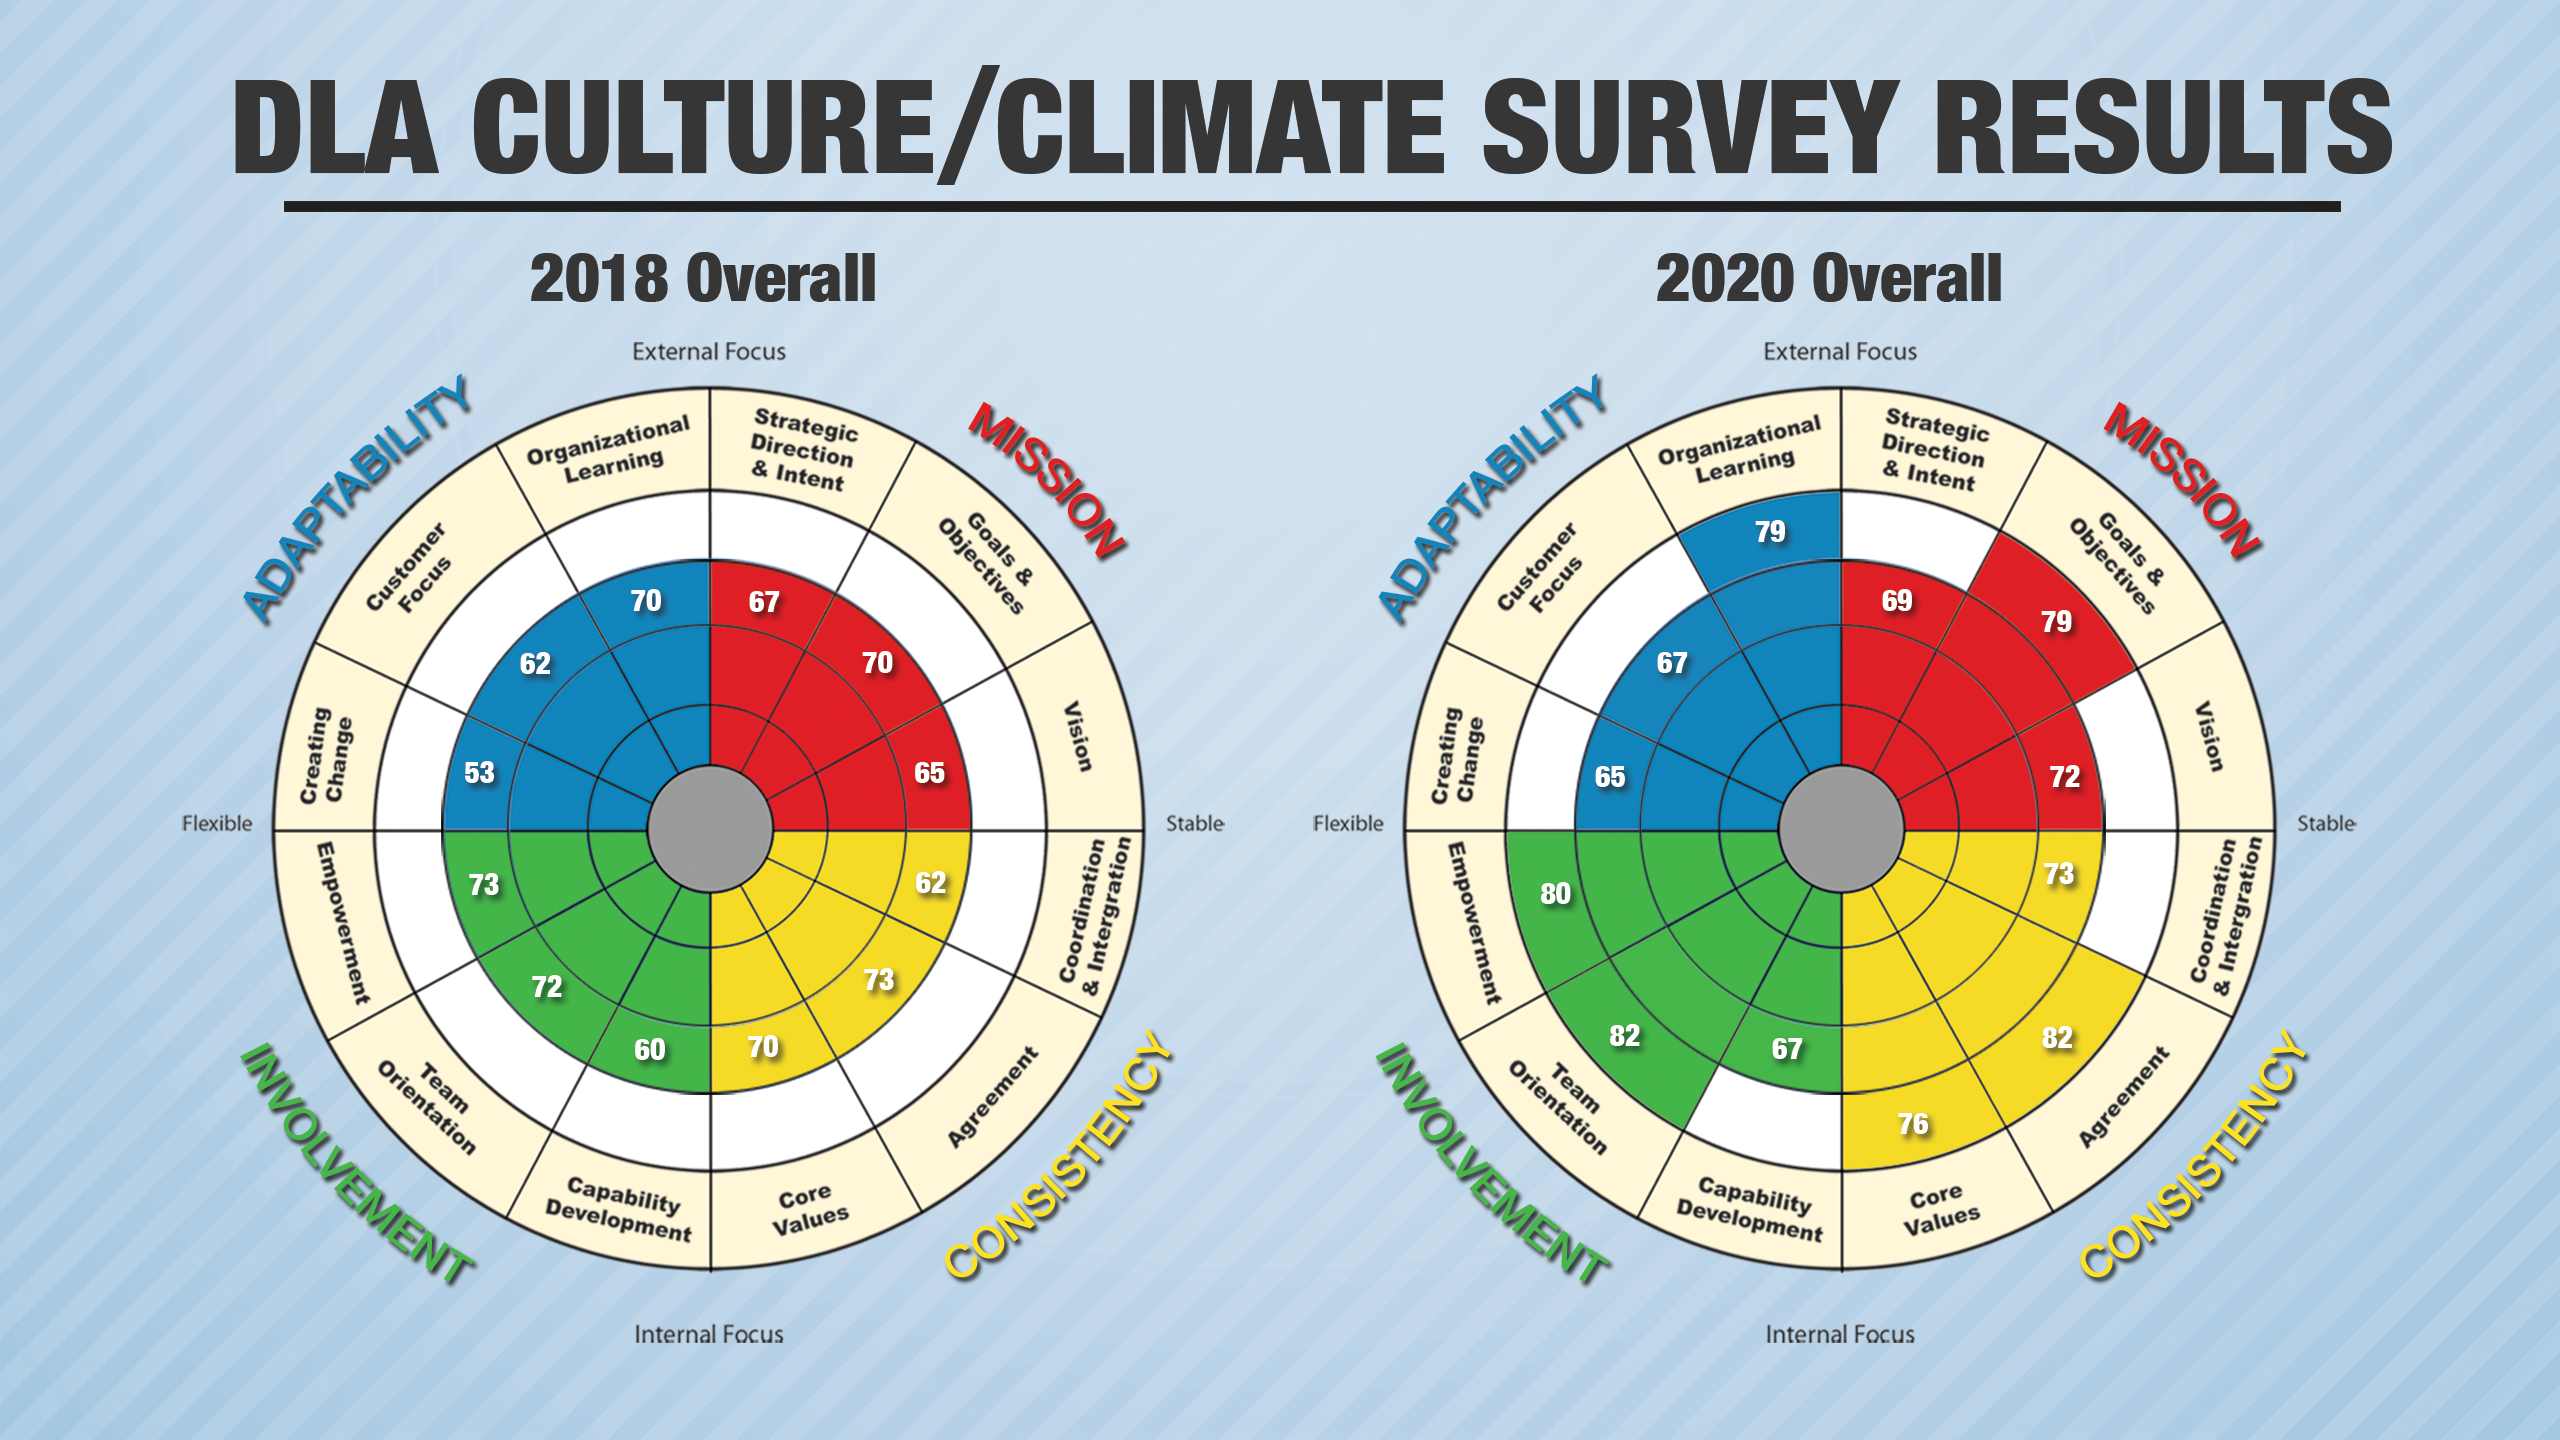 Two charts show the differences in DLA's Culture/Climate Survey results from 2018 to 2020